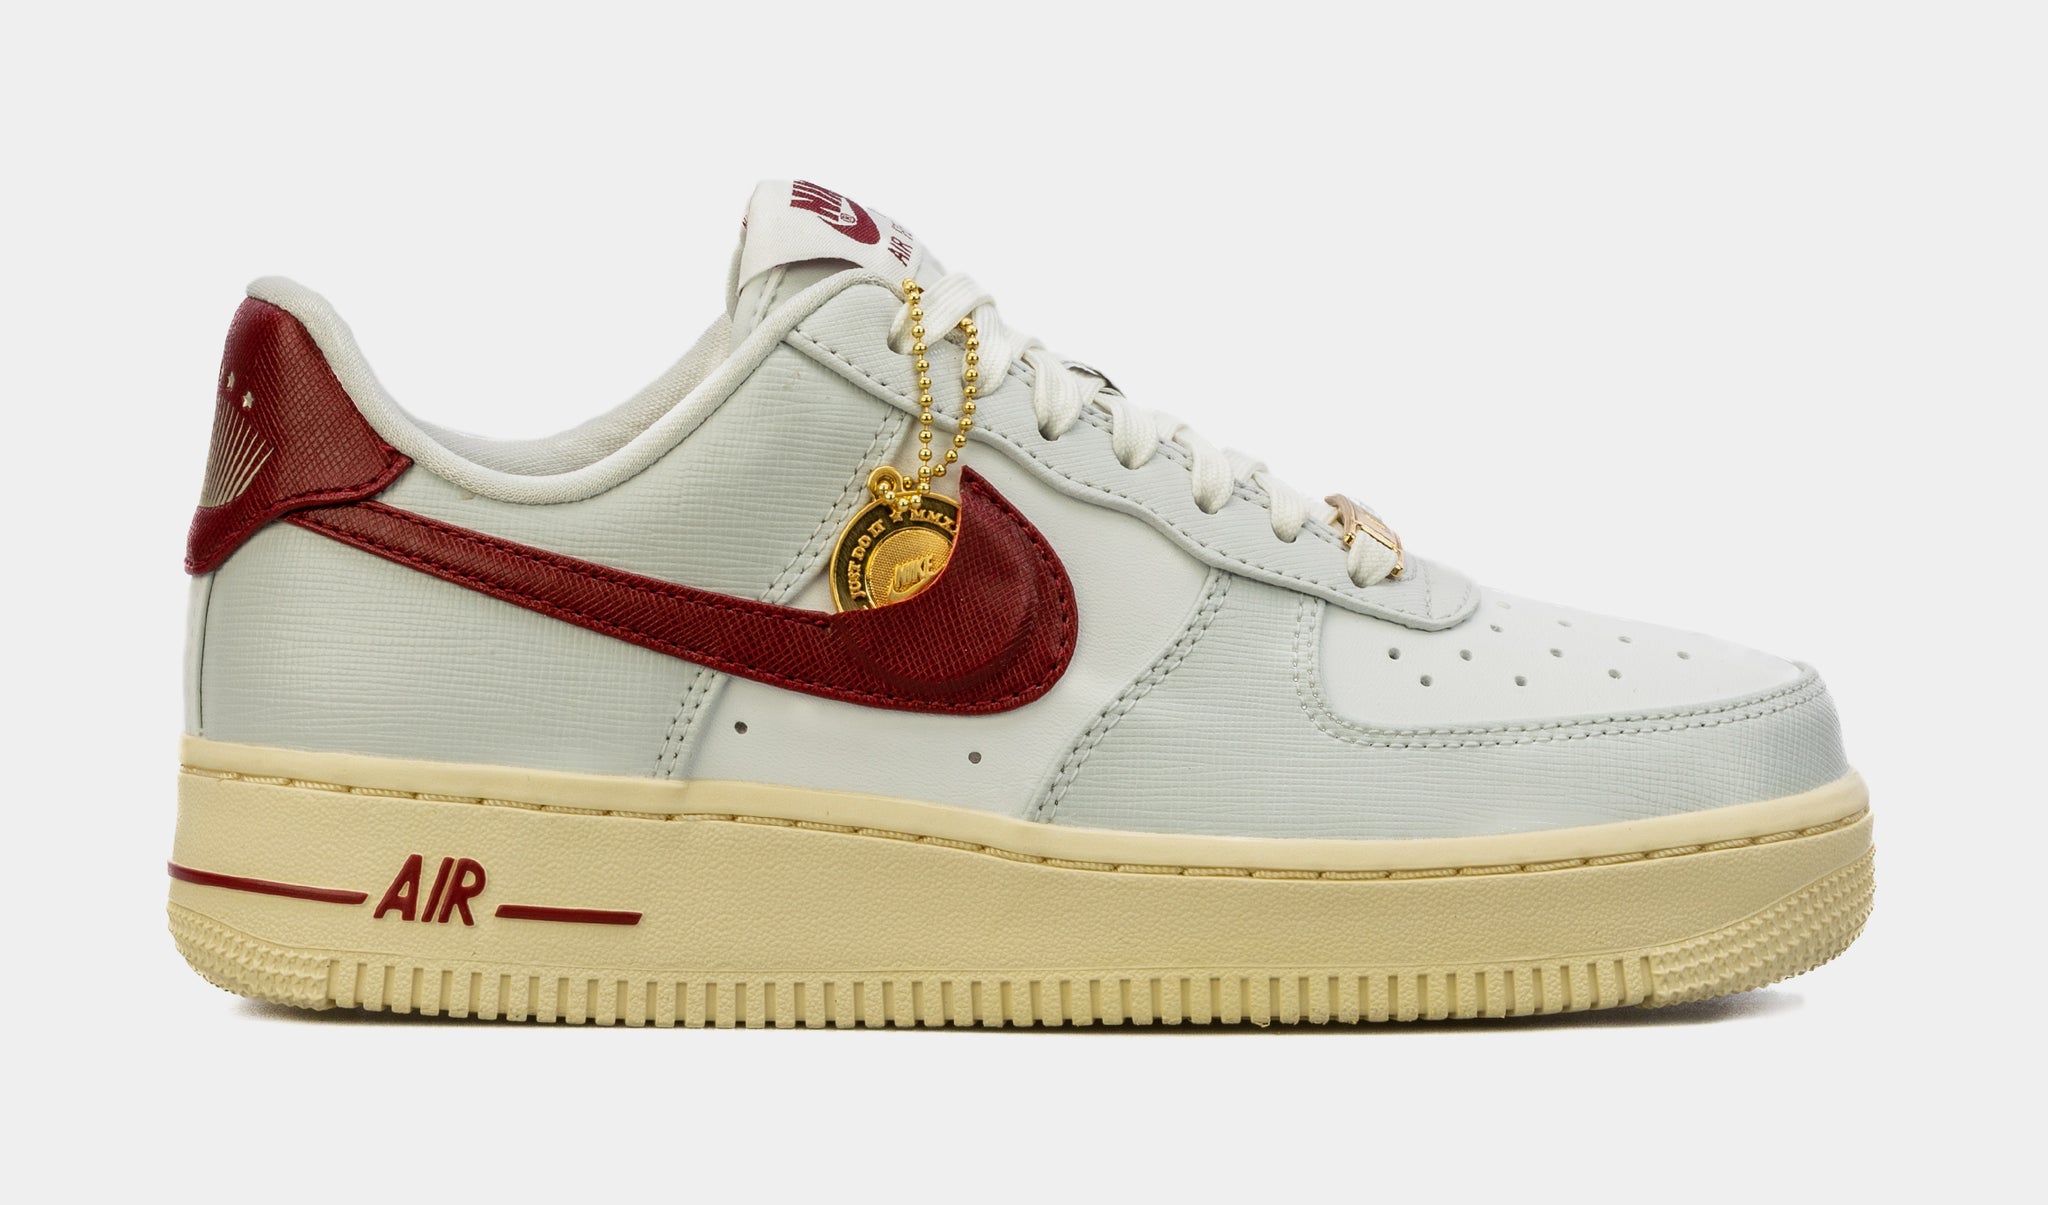 Nike Women's Air Force 1 Low Shoes